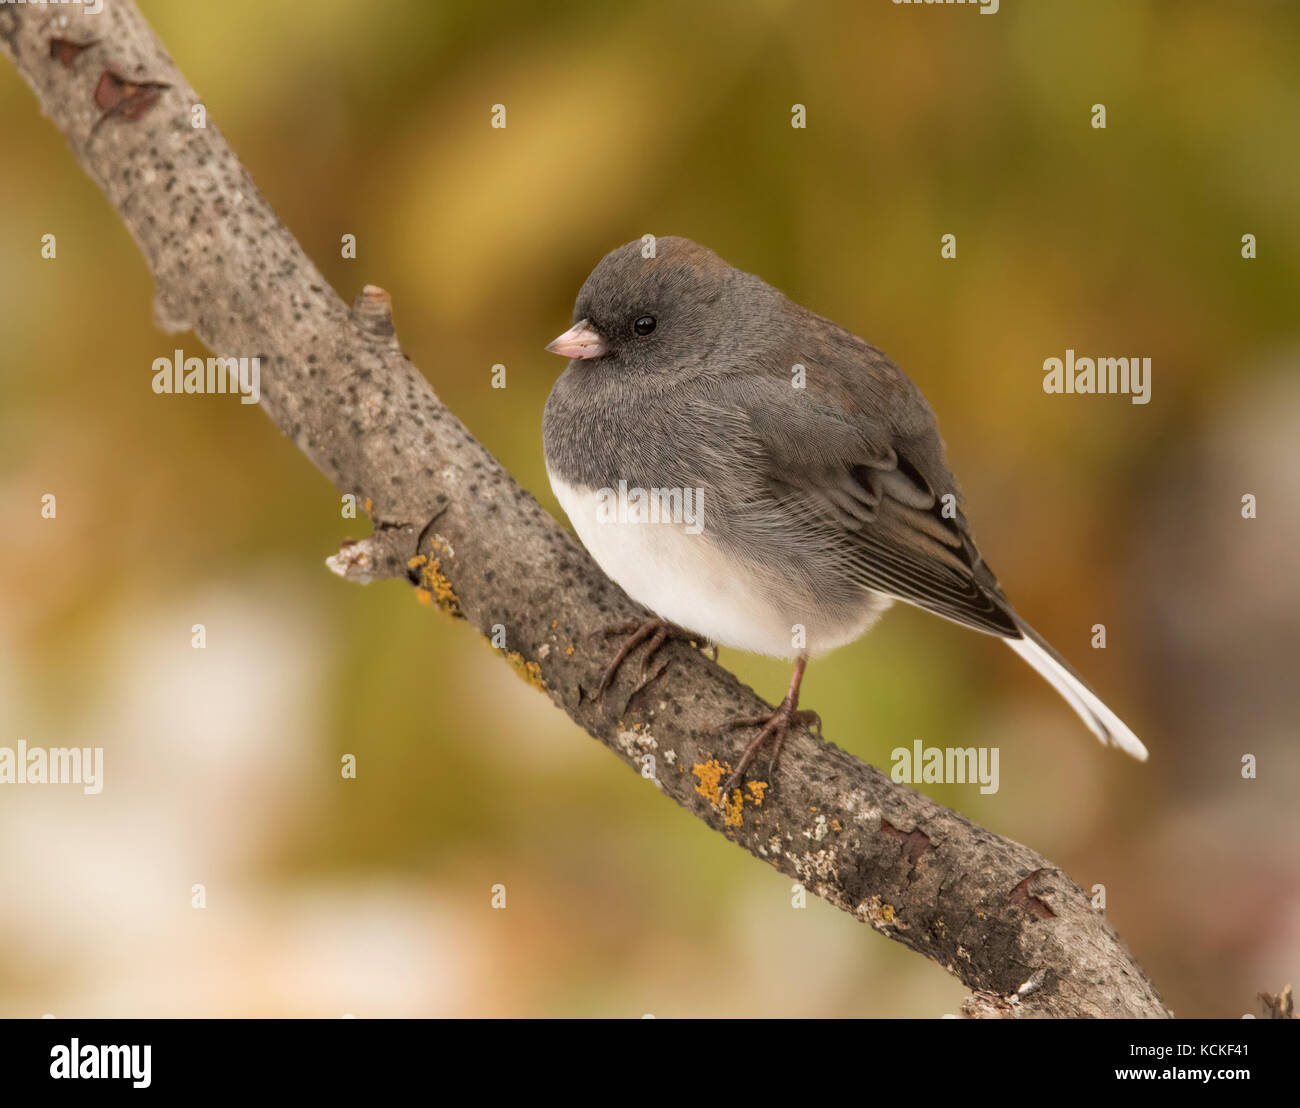 A female Slate-colored Junco, Junco hyemalis, perched on a branch in the autumn in Saskatchewan, Canada Stock Photo